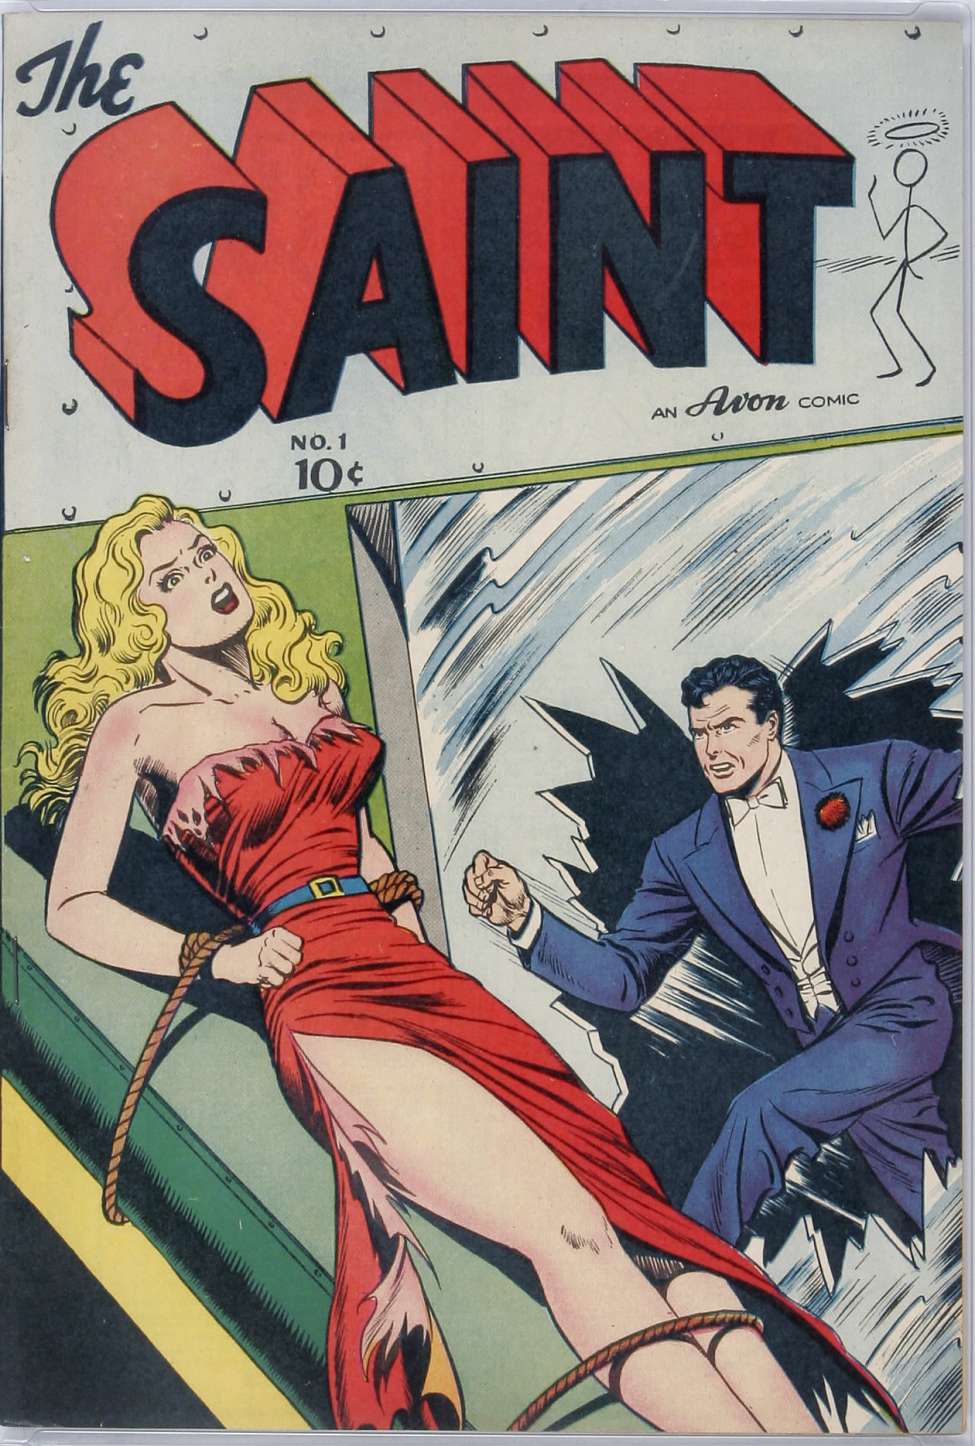 Comic Book Cover For The Saint 1 - Version 1